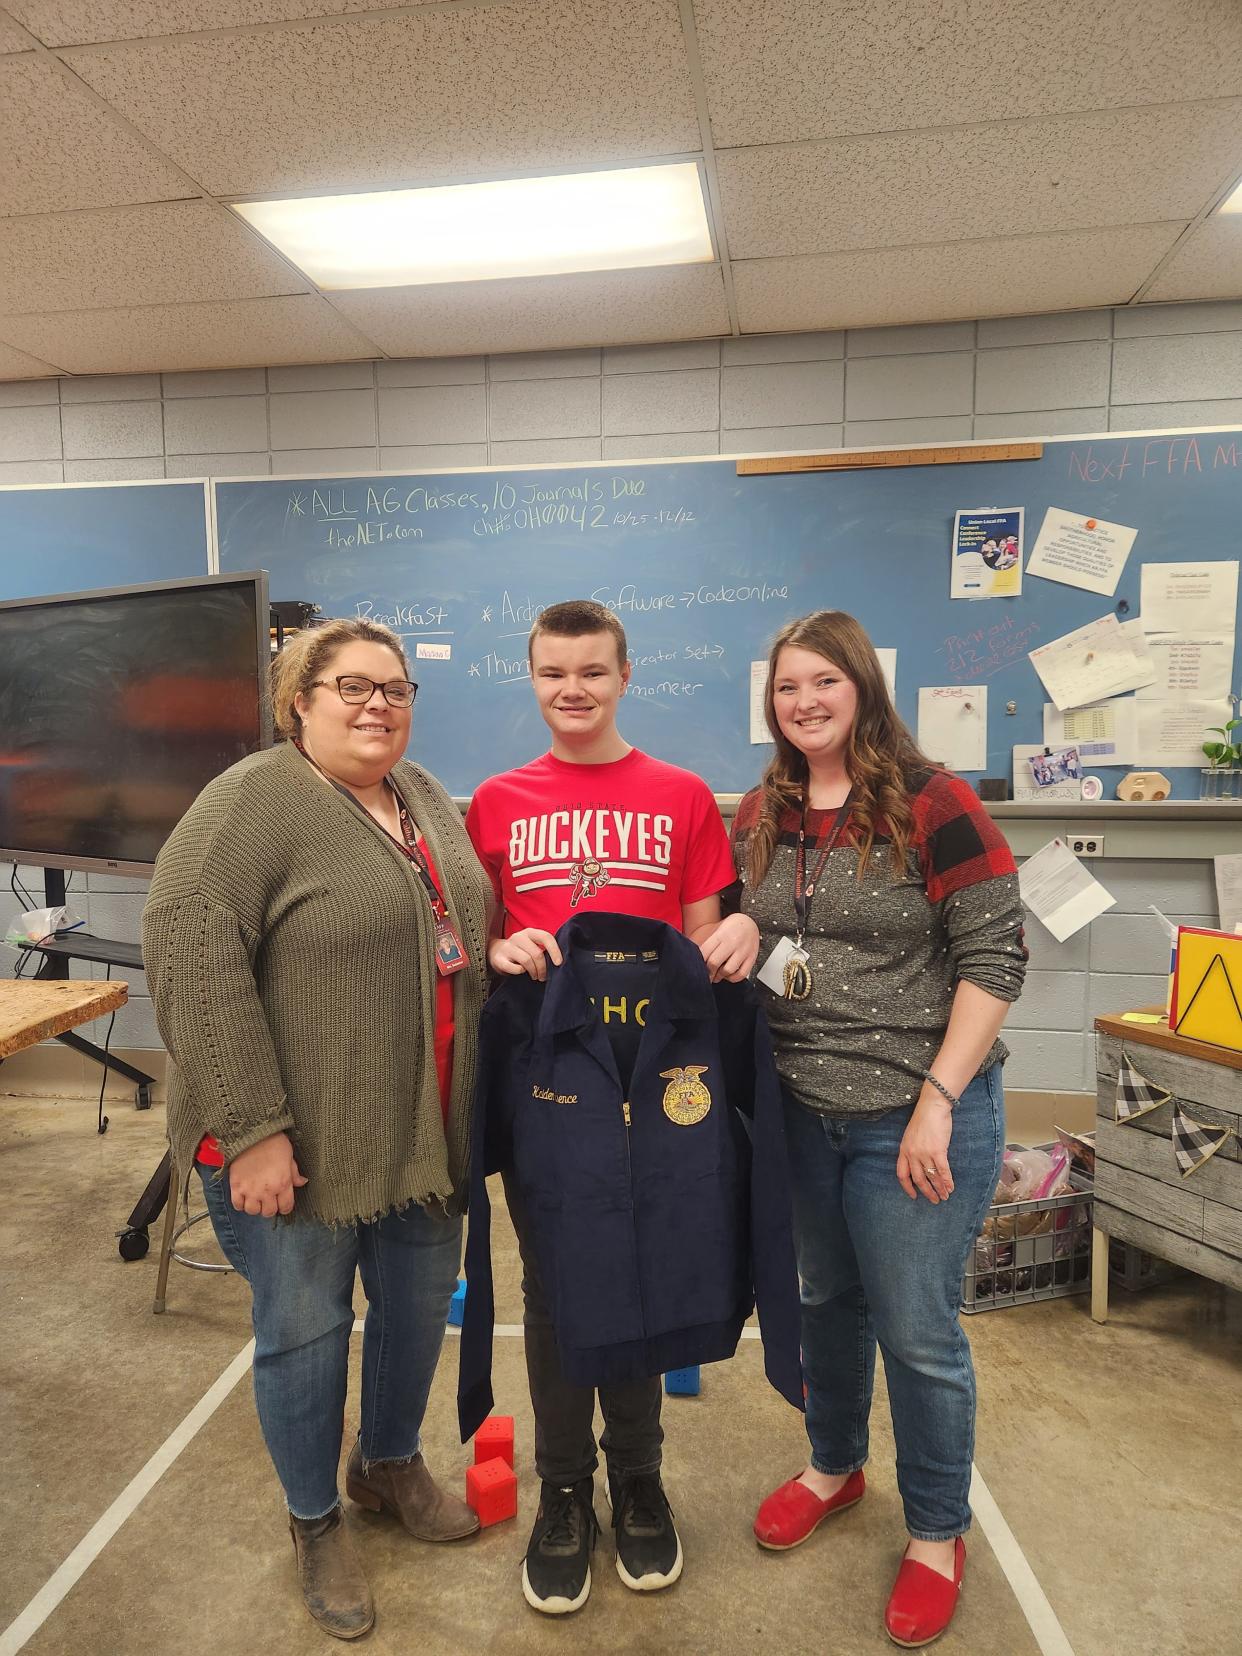 Suzanne Clark presents Kaiden Spence with his blue jacket with 
 Katrina Baker. Caldwell FFA Member Kaiden Spence was the recipient of a free FFA Jacket from the 2022 Ohio FFA Becks Blue Jacket Program. This year the program was able to provide roughly 200 jackets to FFA members across Ohio. Spence's jacket was sponsored by Cardinal Creeks Seeds located in Hicksville, OH.

 First-year FFA students could apply to the program or be nominated. Mrs. Suzanne Clark and Mrs. Katrina Baker nominated Spence for a jacket. They both agreed that Spence would cherish having a blue jacket of his own. Beyond its place in Official Dress, an FFA corduroy jacket is an article of faith, honor and pride. The jacket unifies members in a long-standing tradition and reminds them that they are part of something bigger than themselves. 

 The Caldwell FFA would like to congratulate Mr. Spence on this honor.